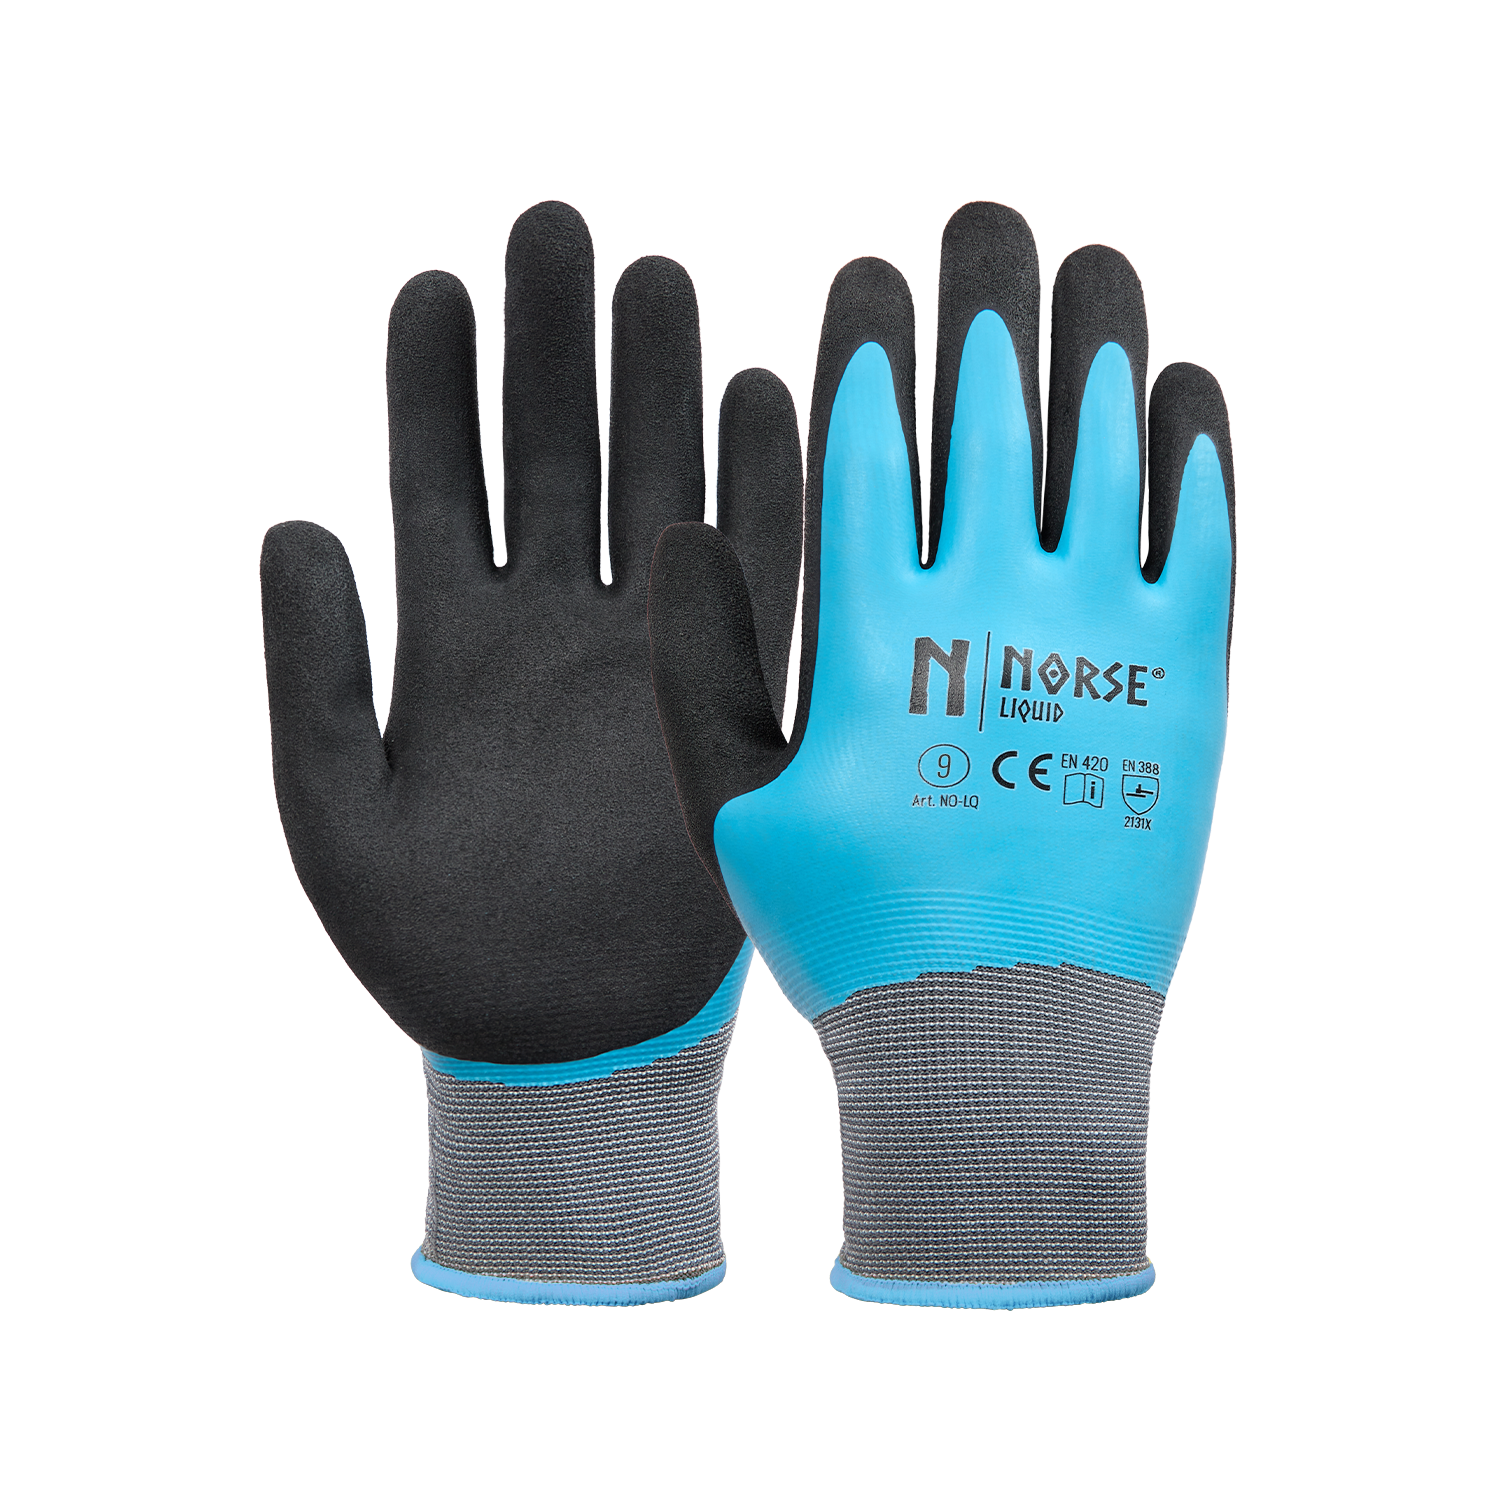 NORSE Liquid Waterproof assembly gloves size 10